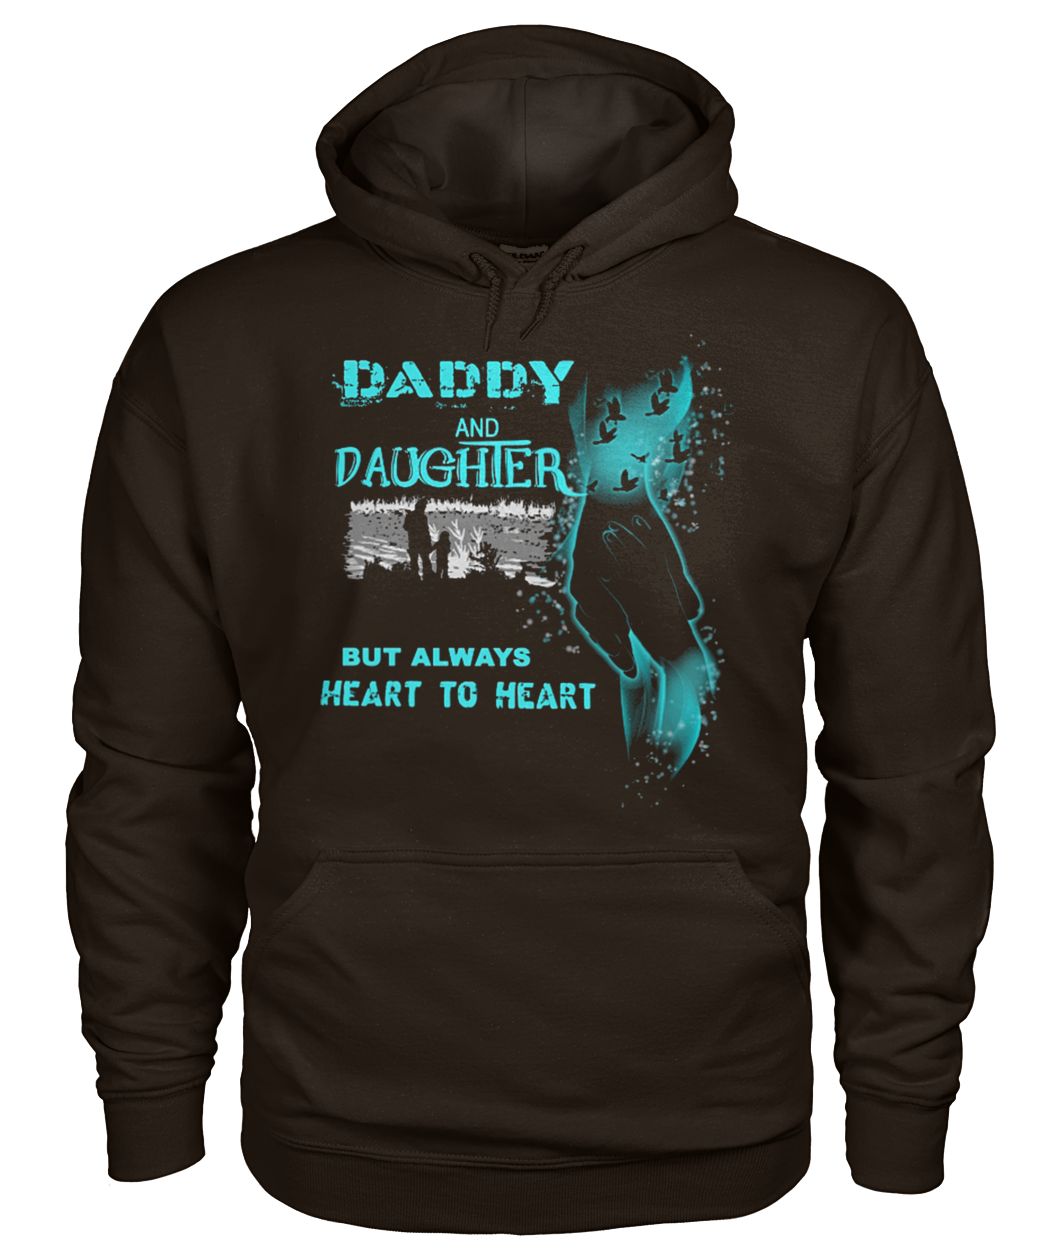 Daddy and daughter but always heart to heart gildan hoodie